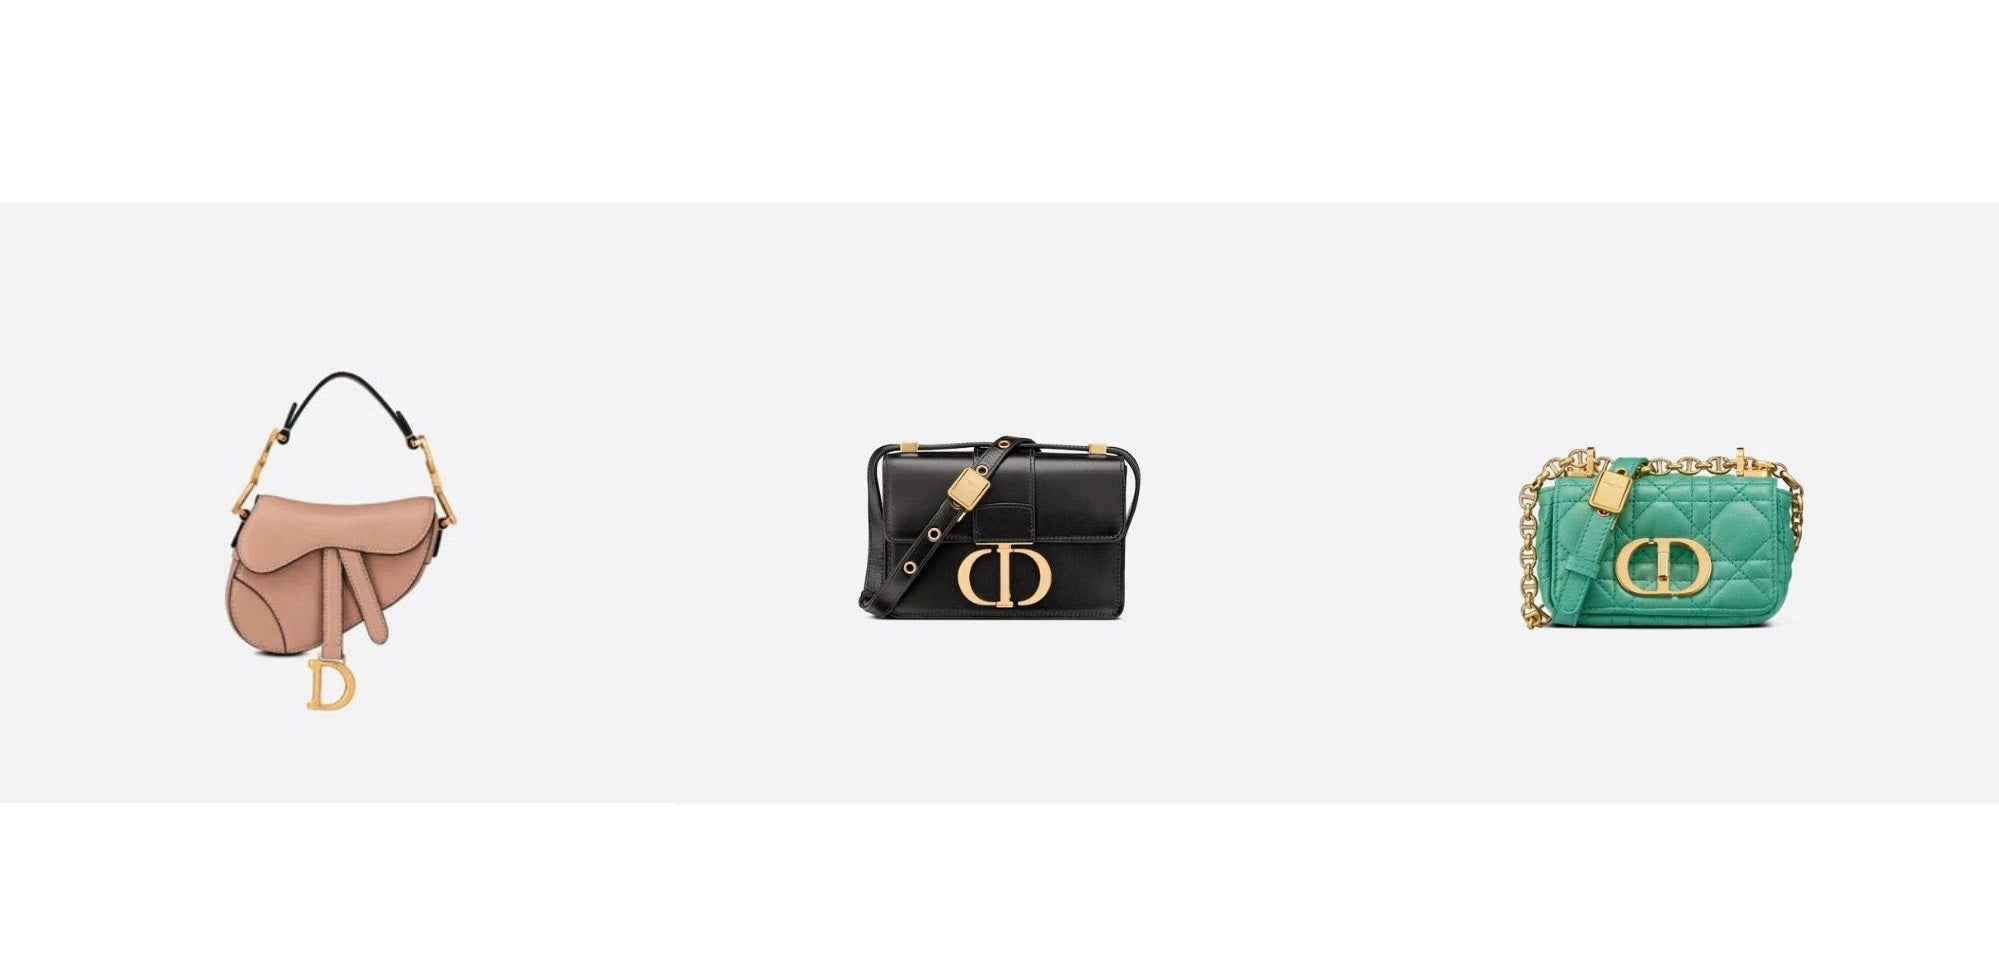 How Much Is Dior? Christian Dior Price Guide cheapest dior bag